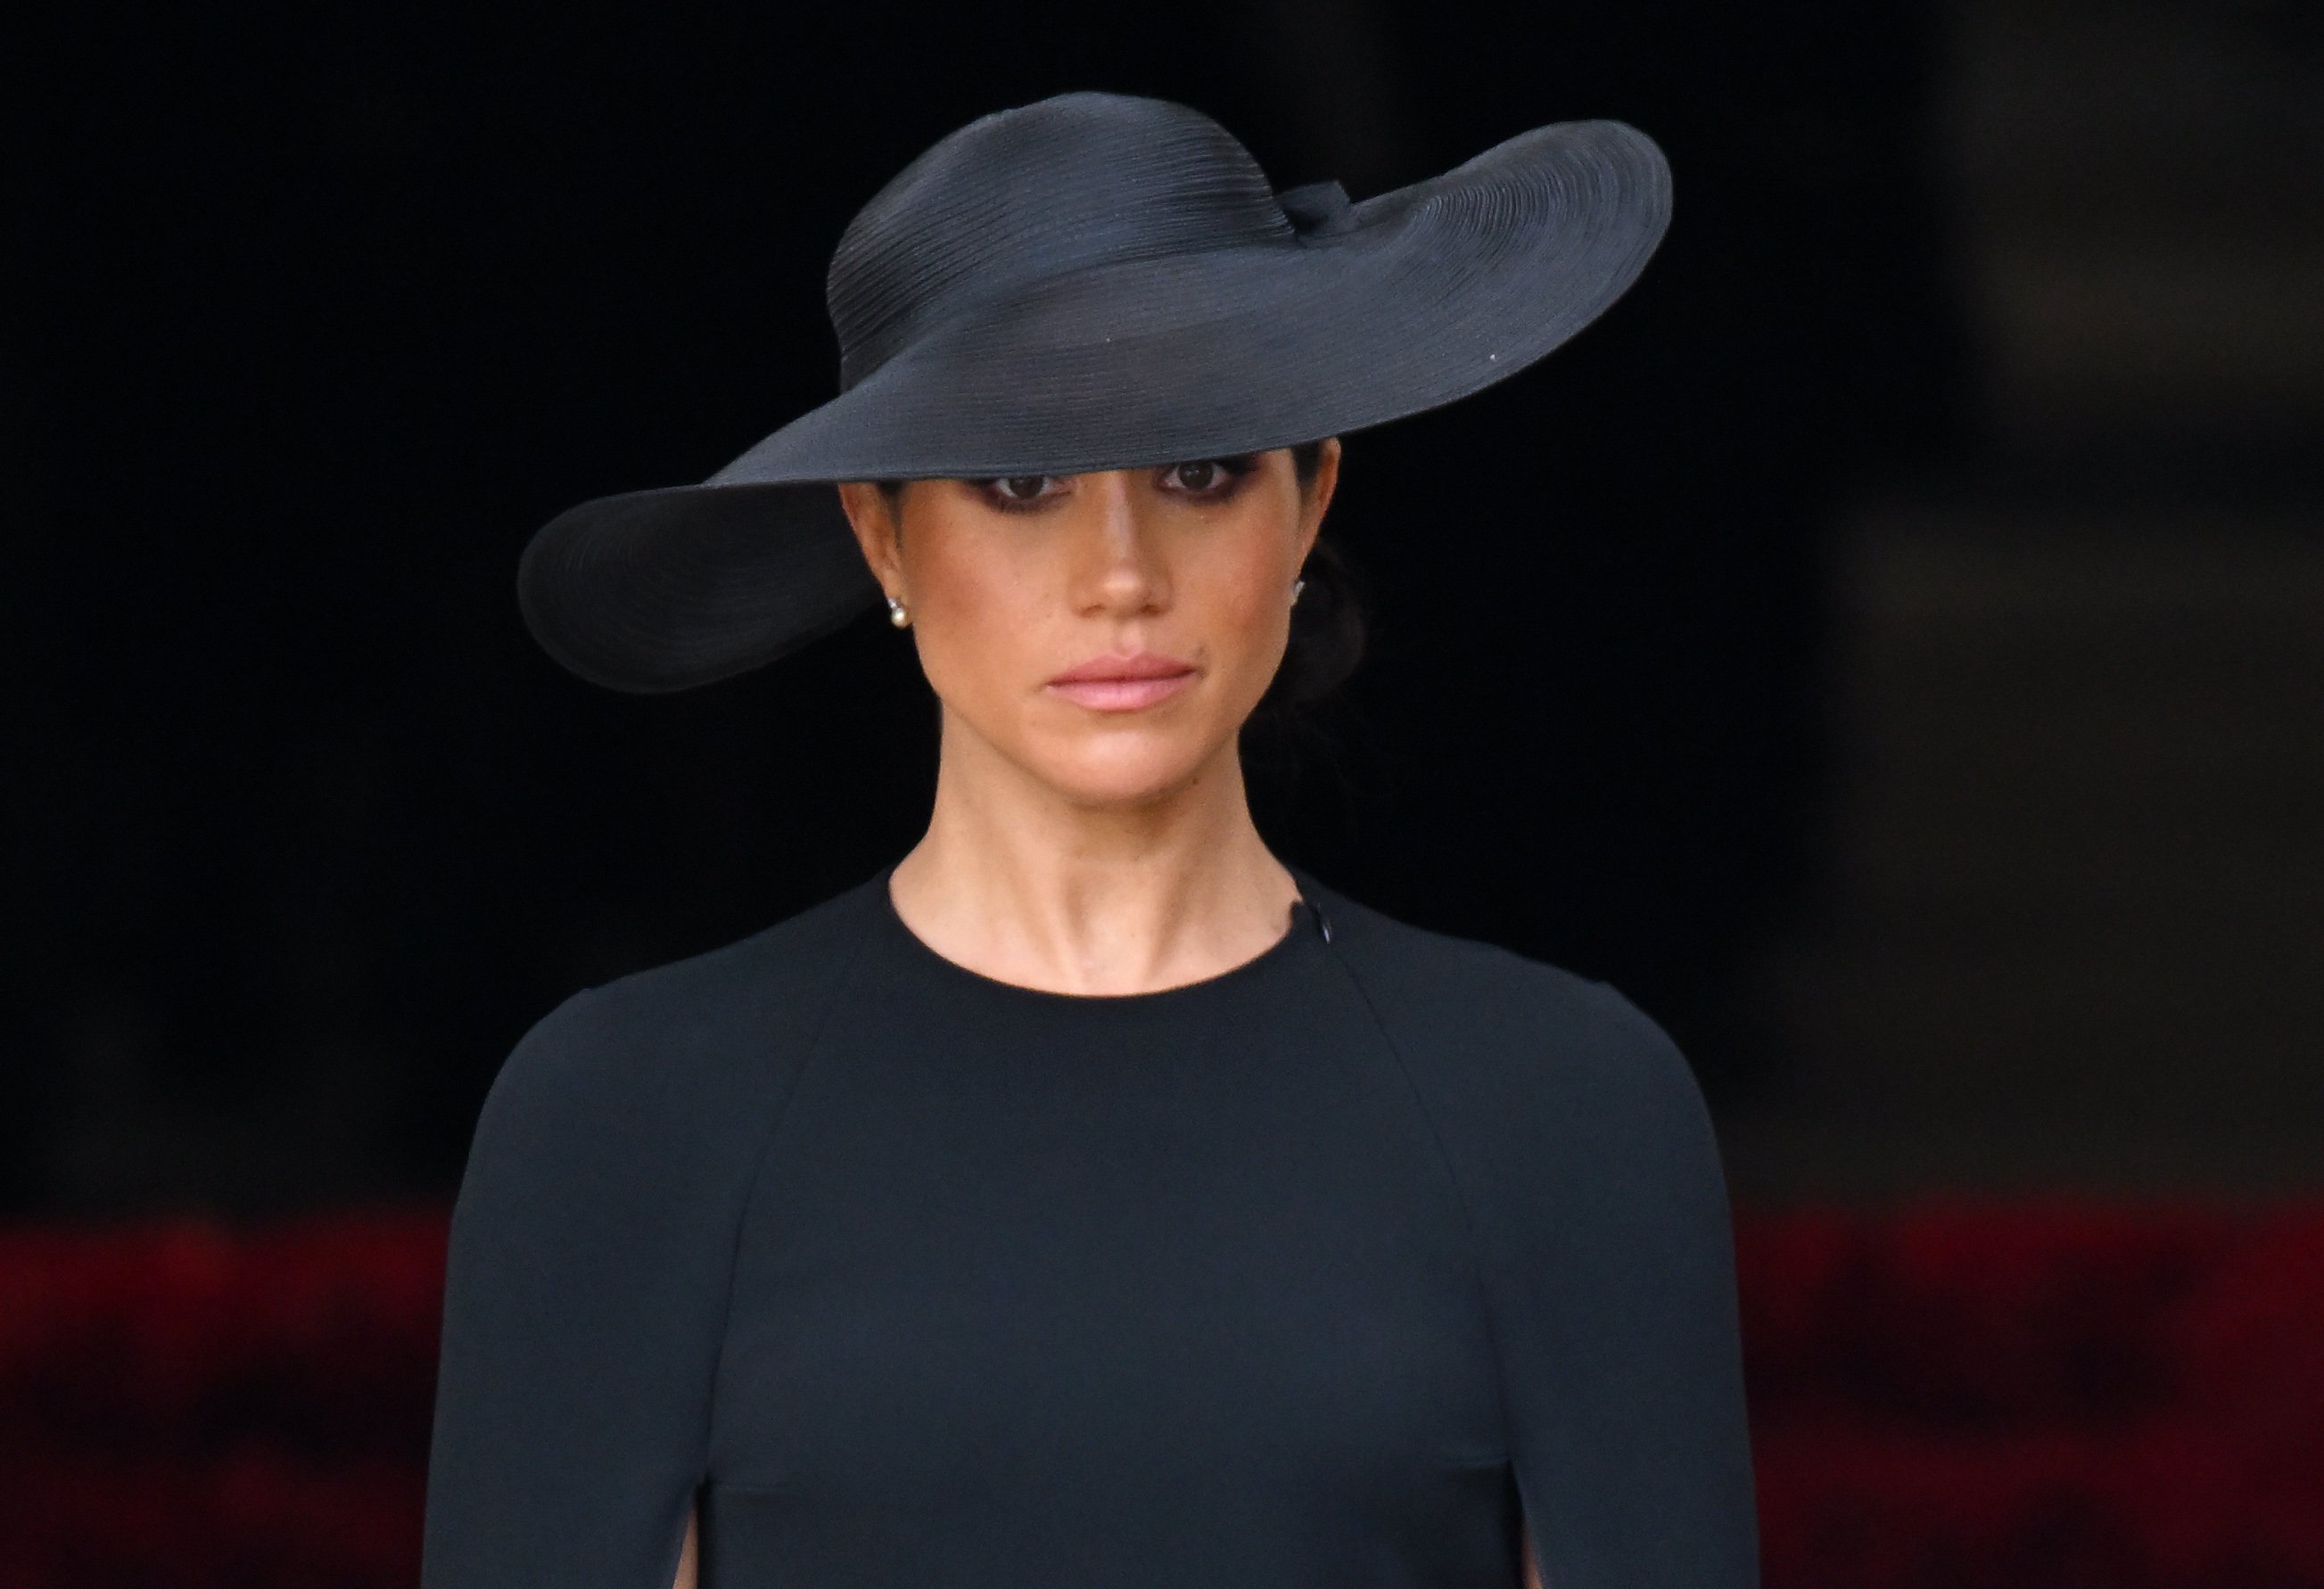 Meghan, Duchess of Sussex during the State Funeral of Queen Elizabeth II at Westminster Abbey on September 19, 2022 in London, England. | Source: Getty Images